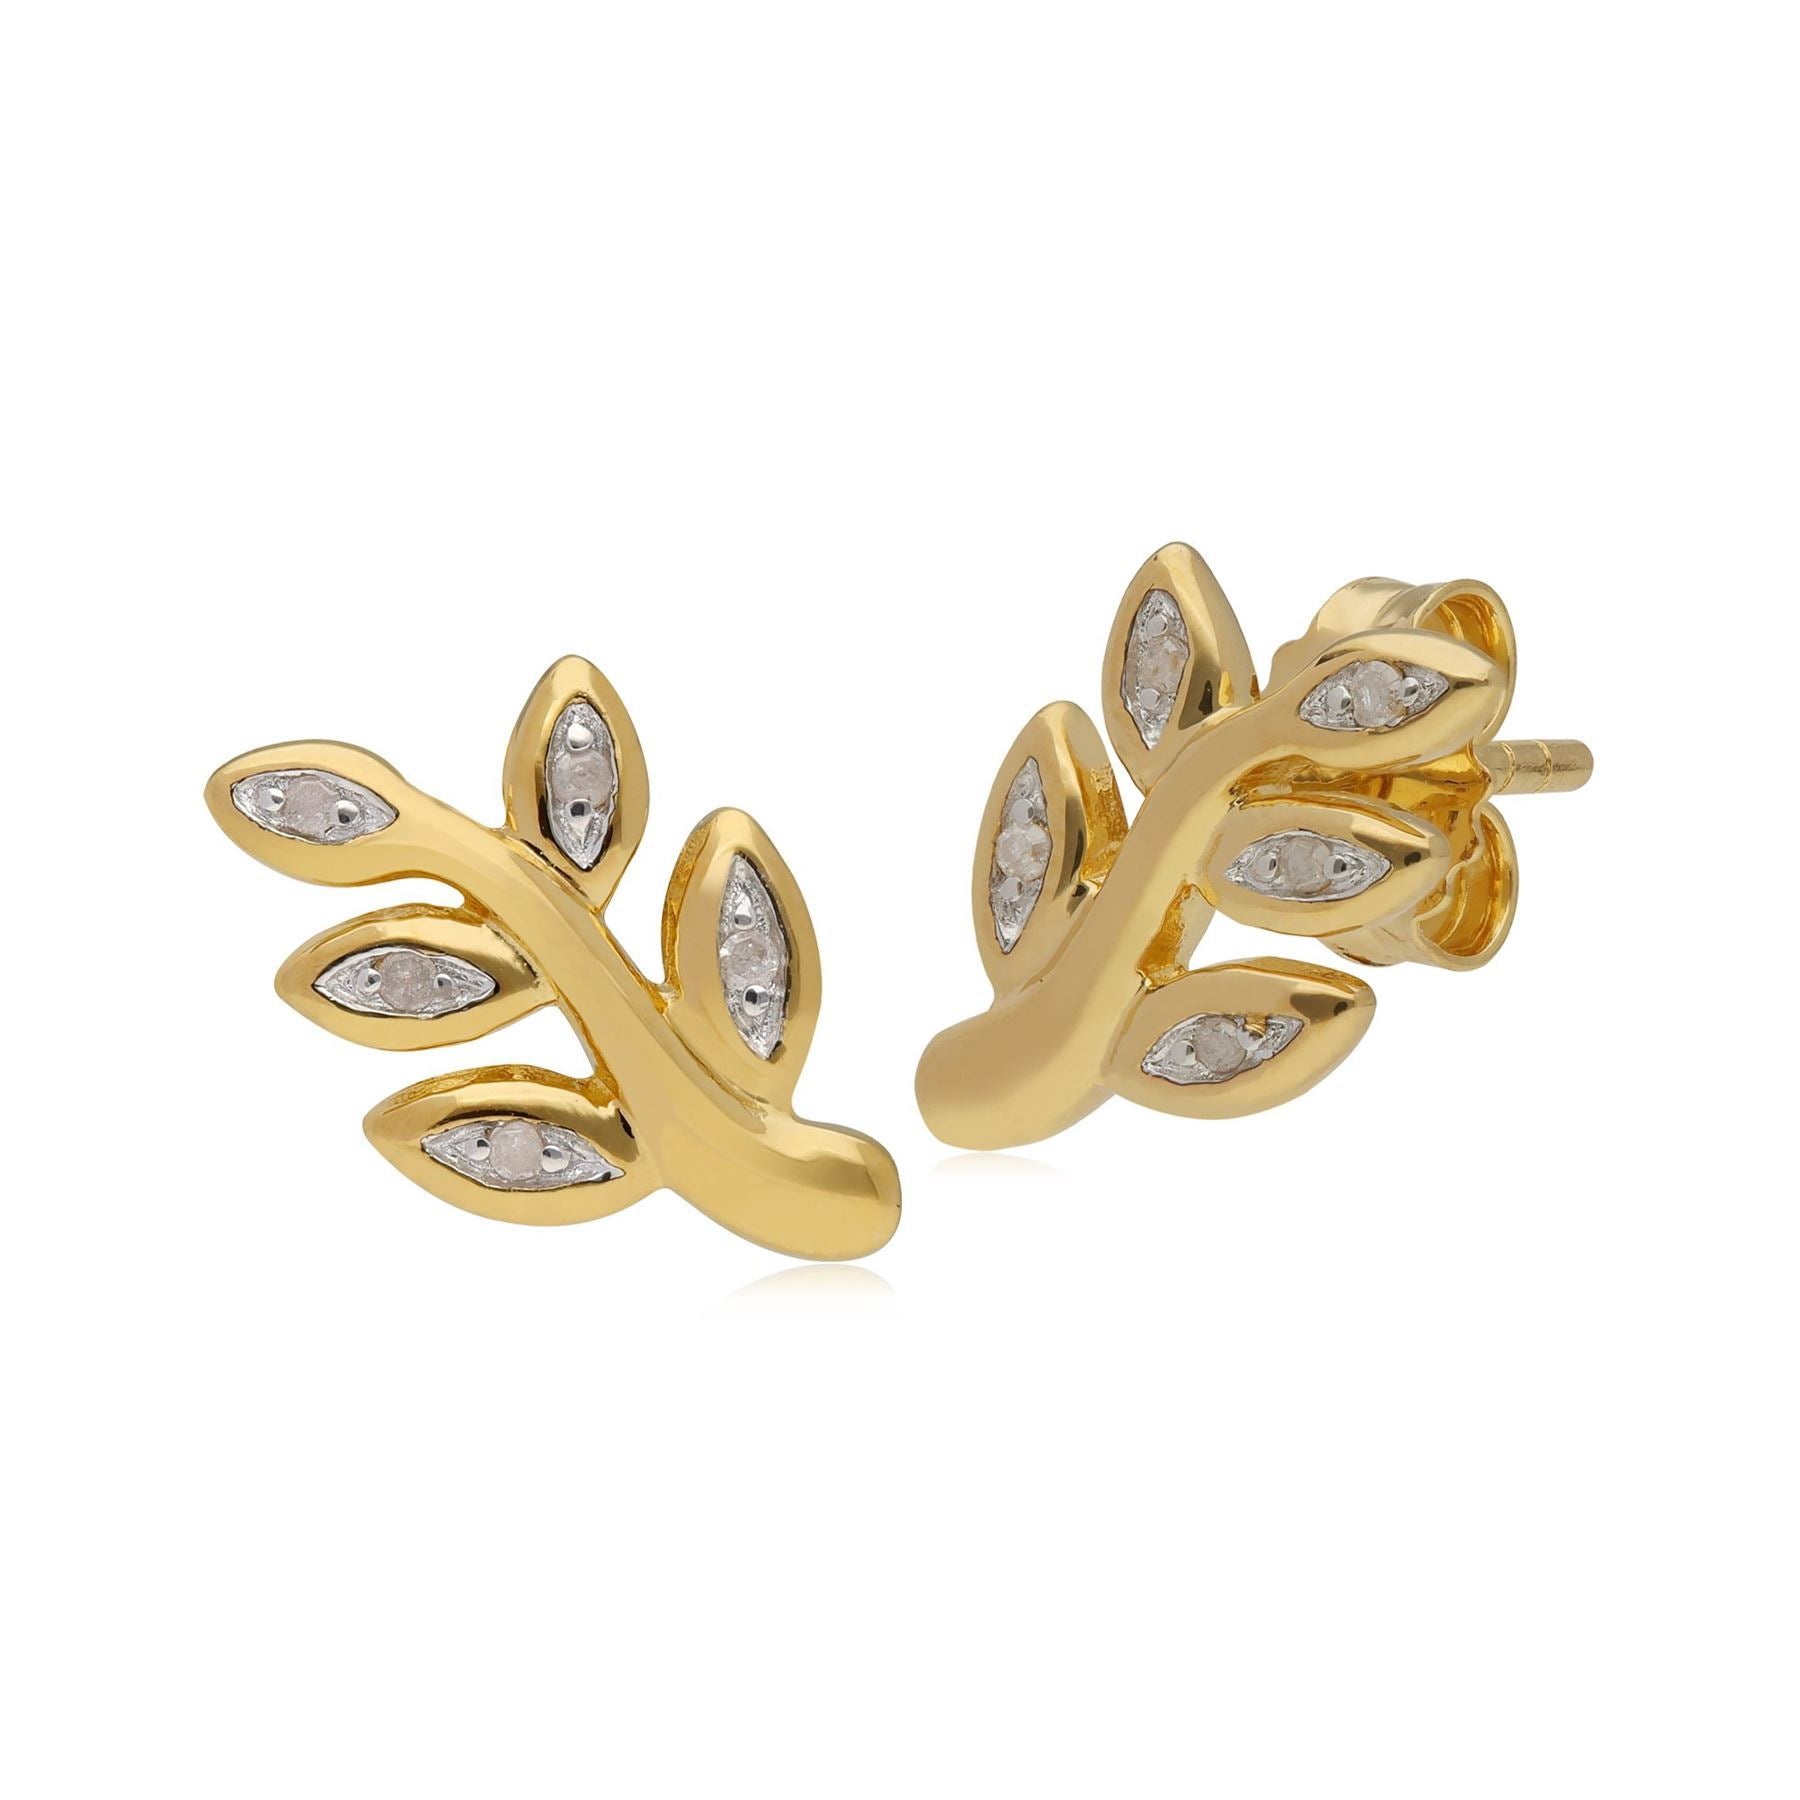 Kosmos Diamond Leaf Shaped Stud Earrings in Yellow Gold Plated Sterling Silver